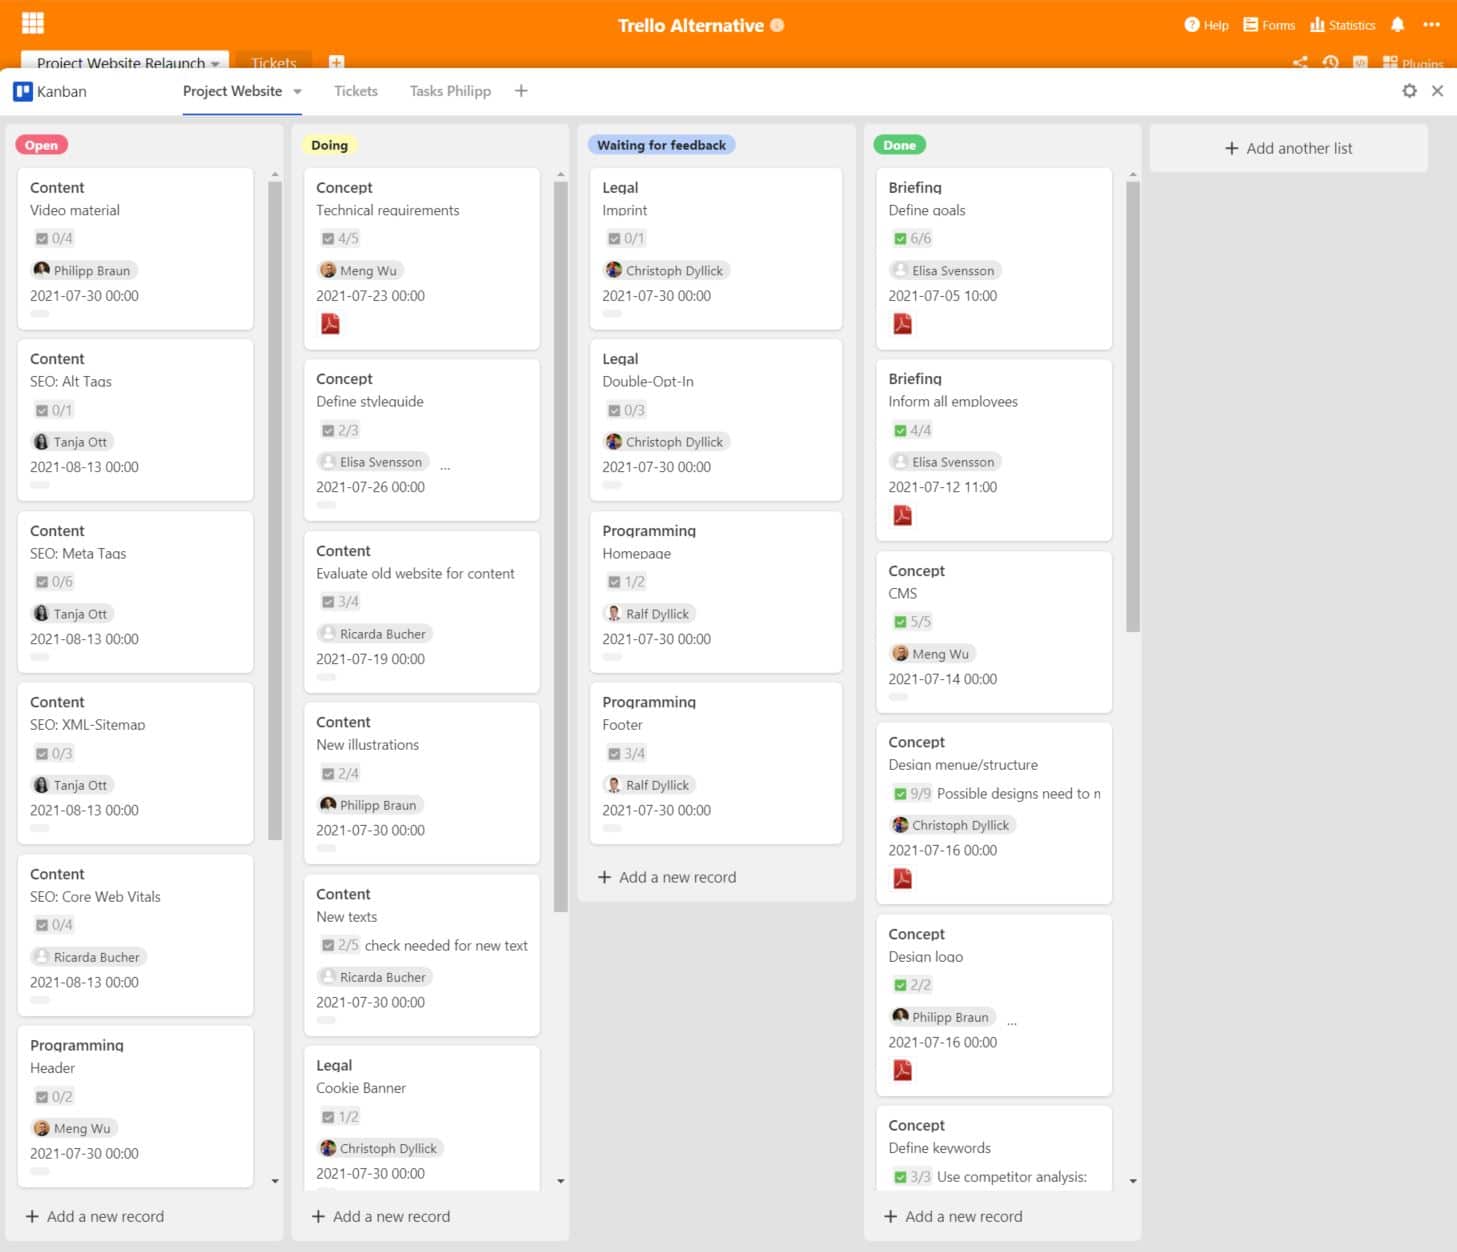 With the Kanban plugin, a detailed Kanban board can be created.